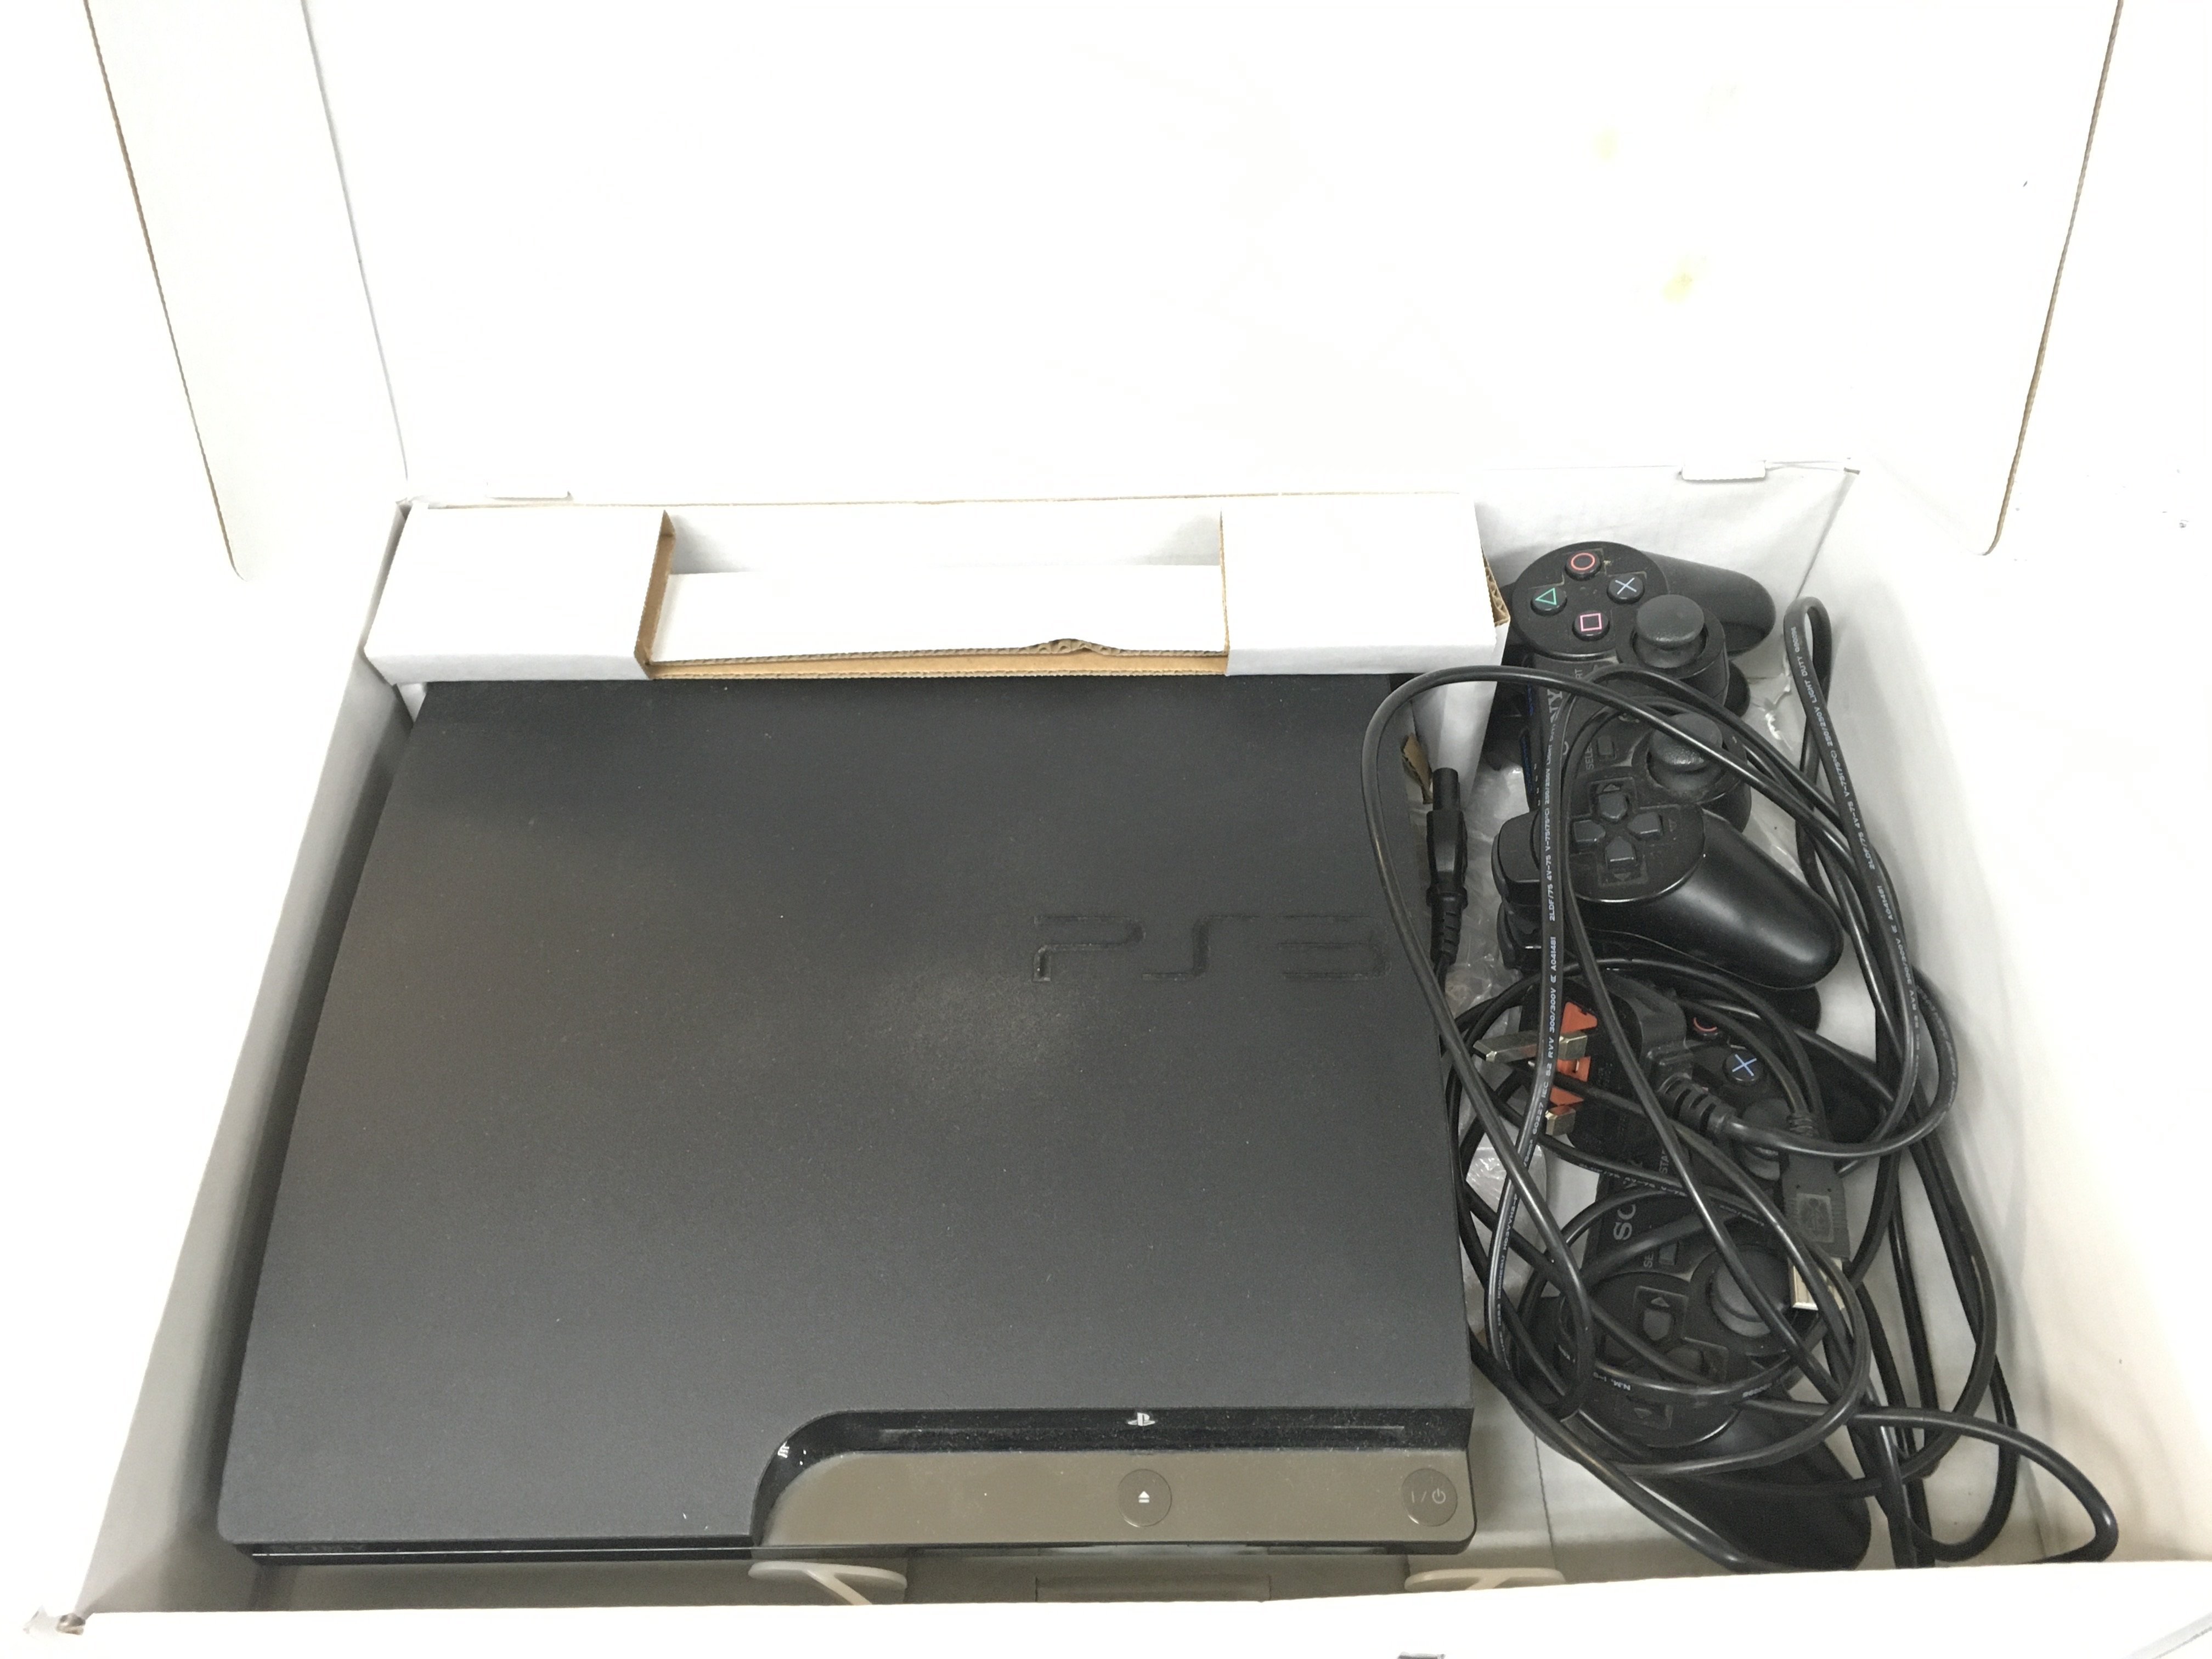 Sony PlayStation 3 with controllers, with a collec